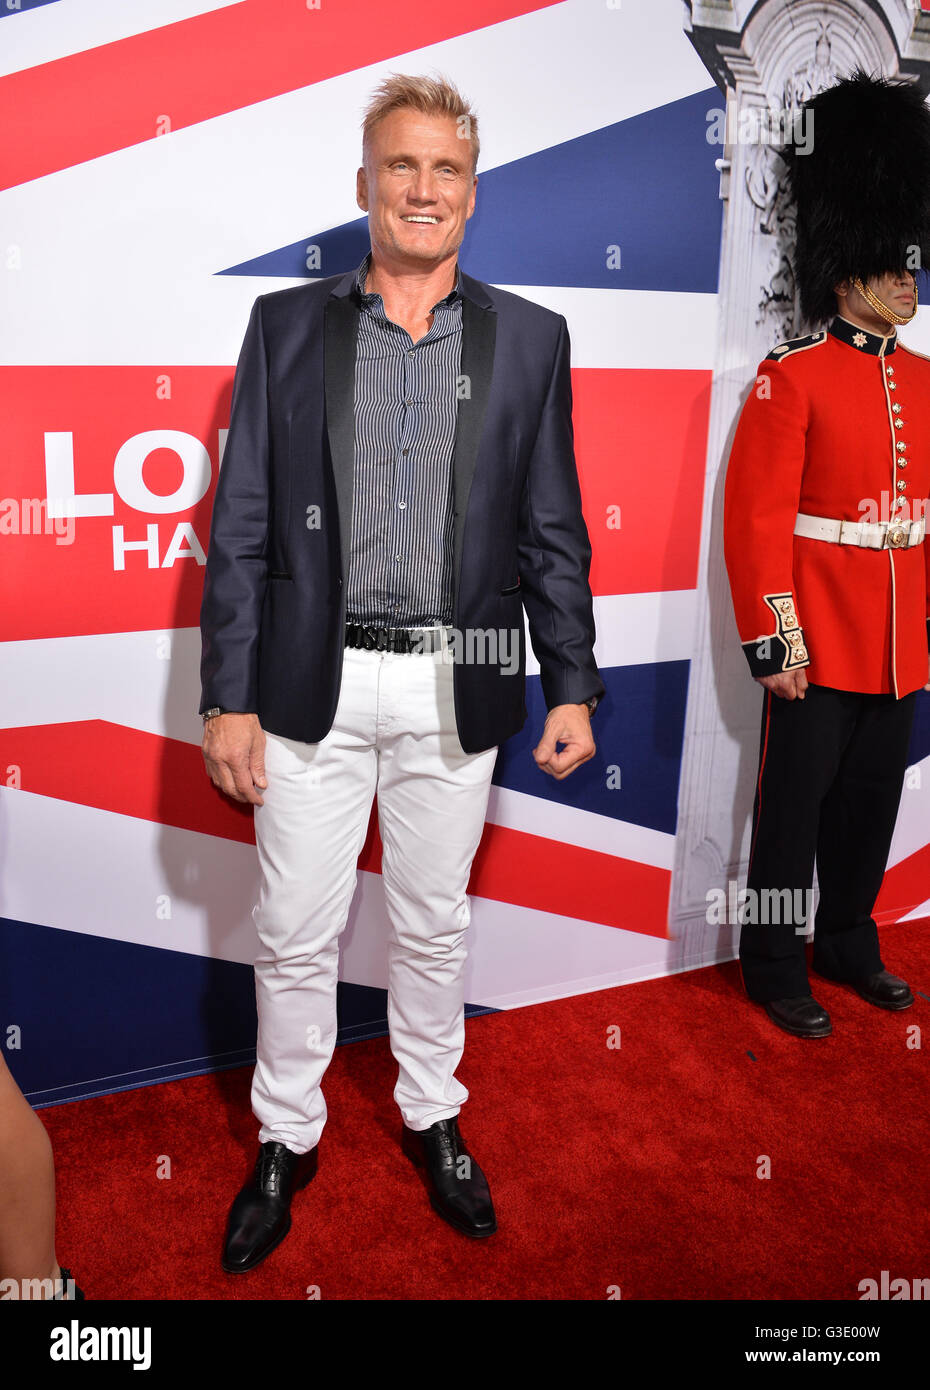 LOS ANGELES, CA - MARCH 1, 2016: Actor Dolph Lundgren at the Los Angeles premiere of 'London Has Fallen' at the Cinerama Dome, Hollywood. Stock Photo